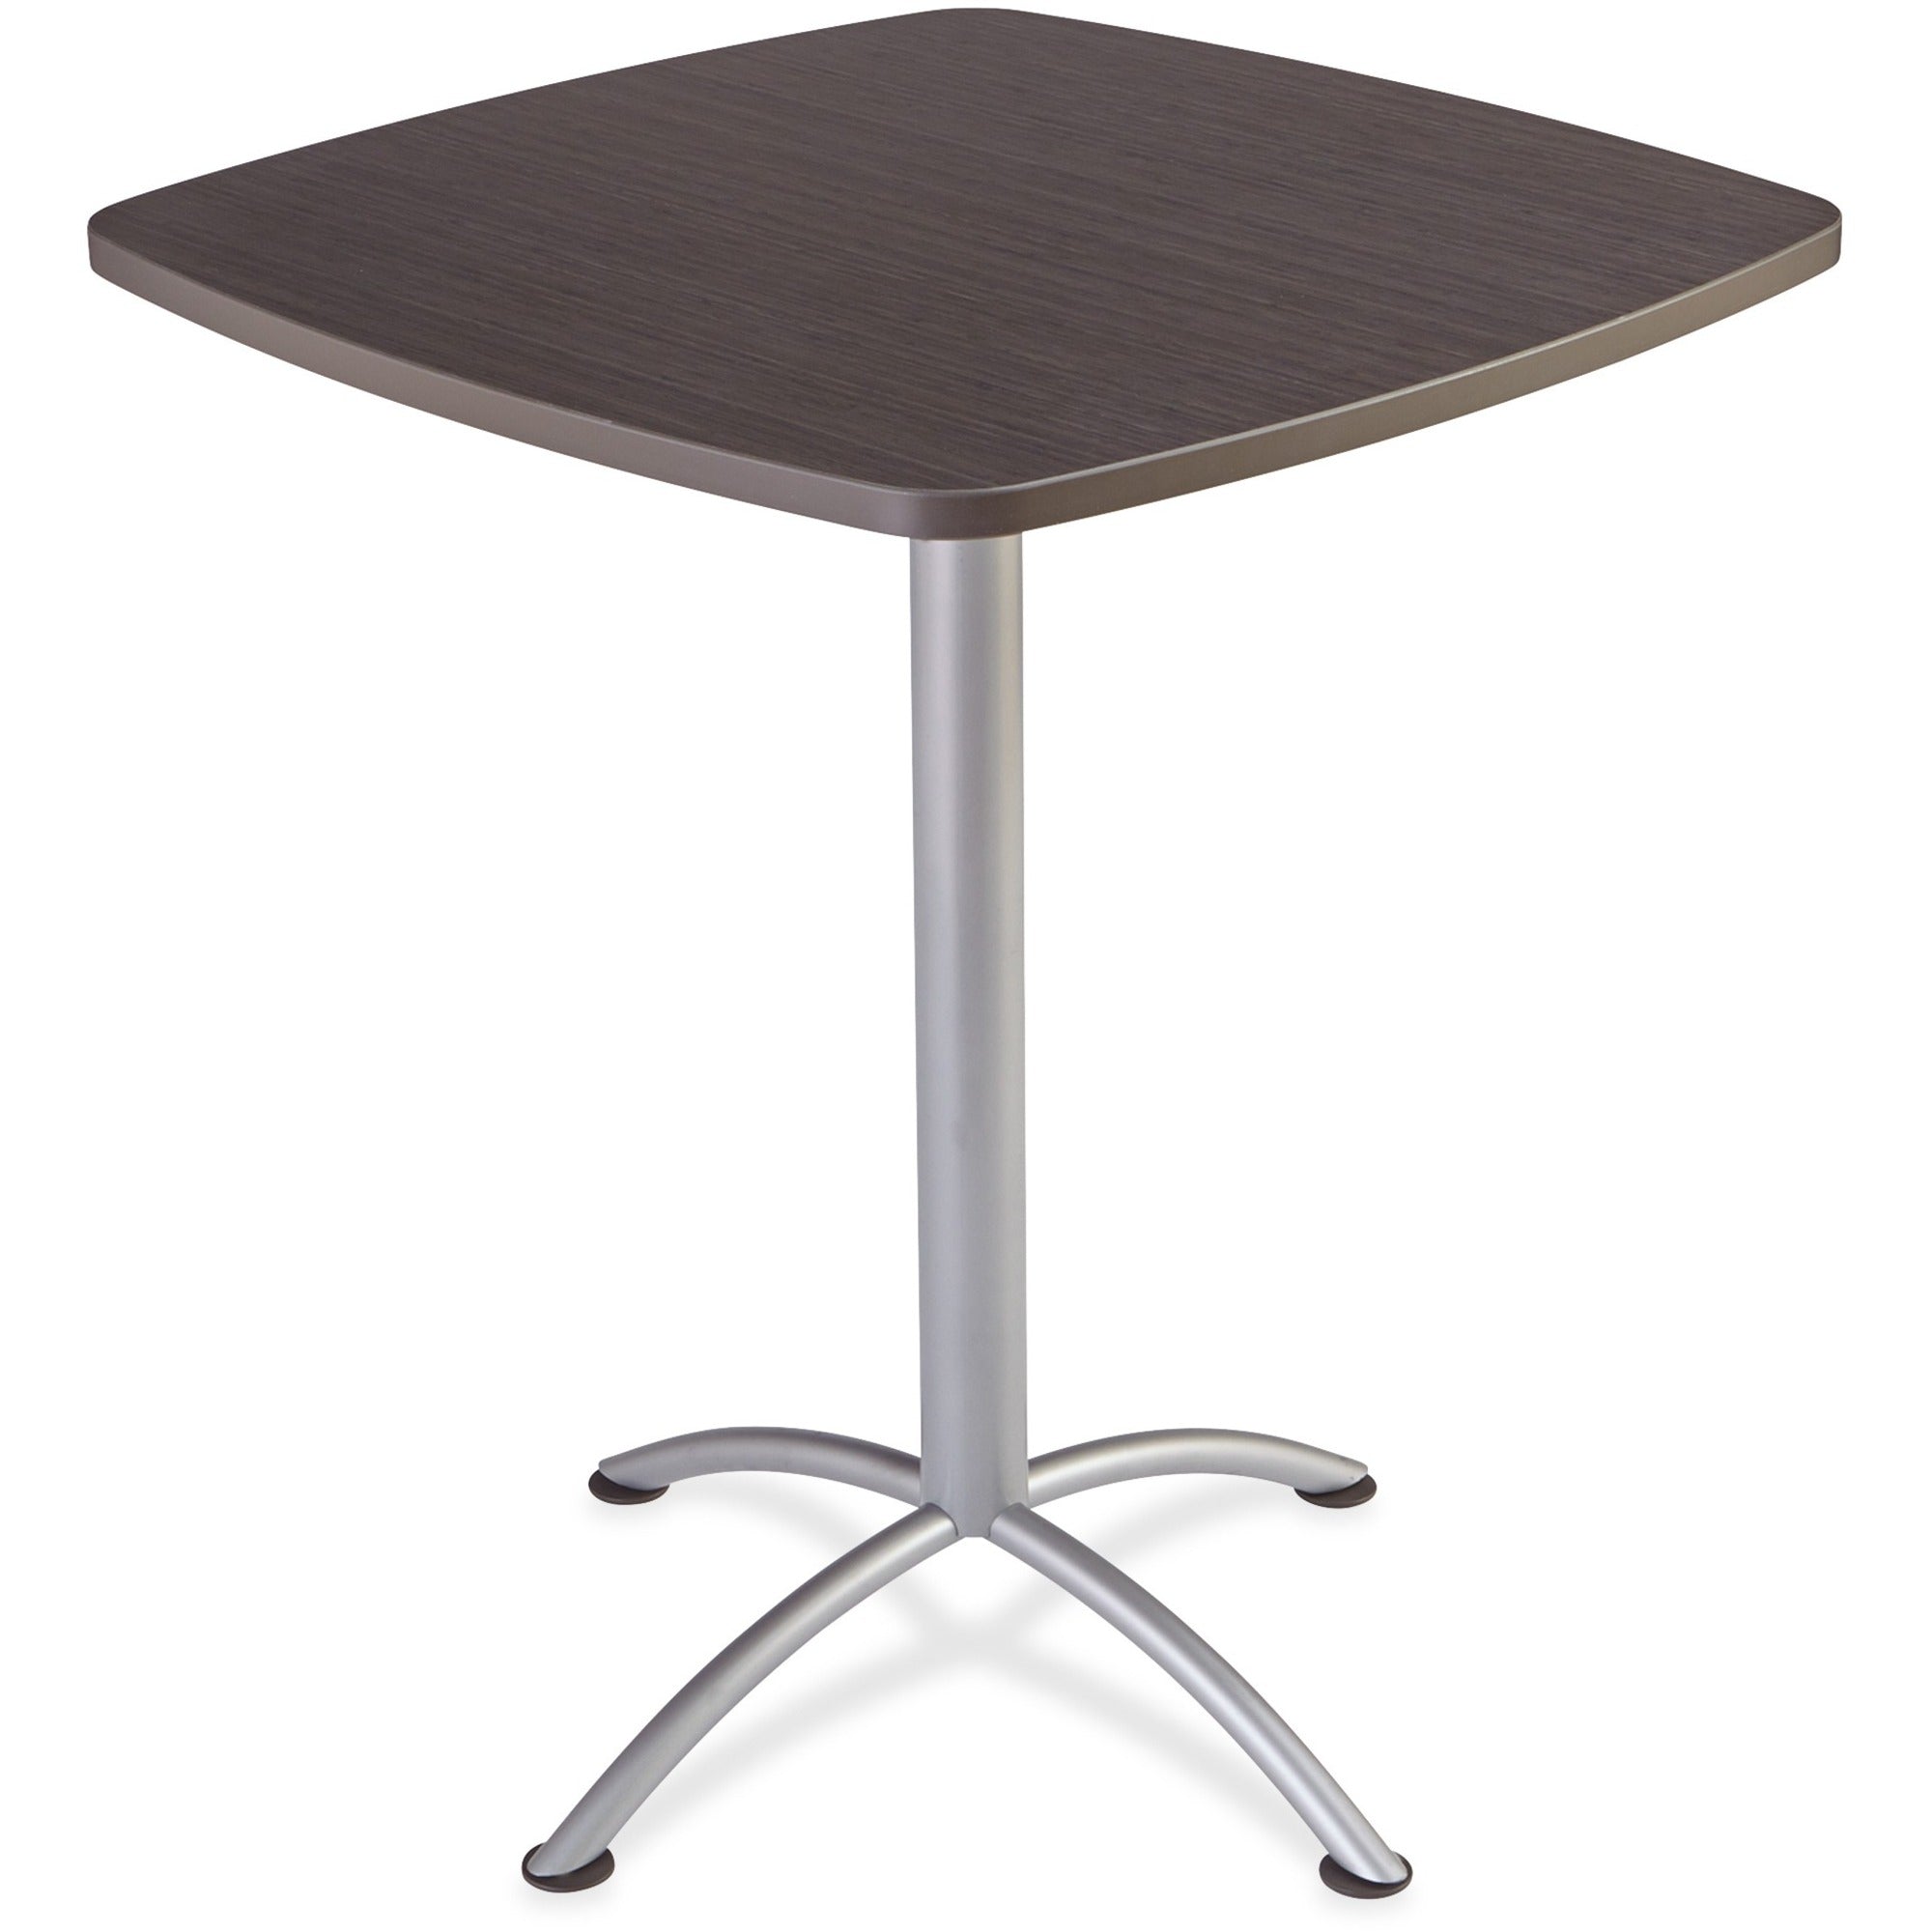 Iceberg iLand 42"H Square Bistro Table - For - Table TopSquare Top - Powder Coated Silver Base - Contemporary Style - 36" Table Top Length x 36" Table Top Width x 1.13" Table Top Thickness - 42" Height - Assembly Required - Gray, Laminated, Silver - - 